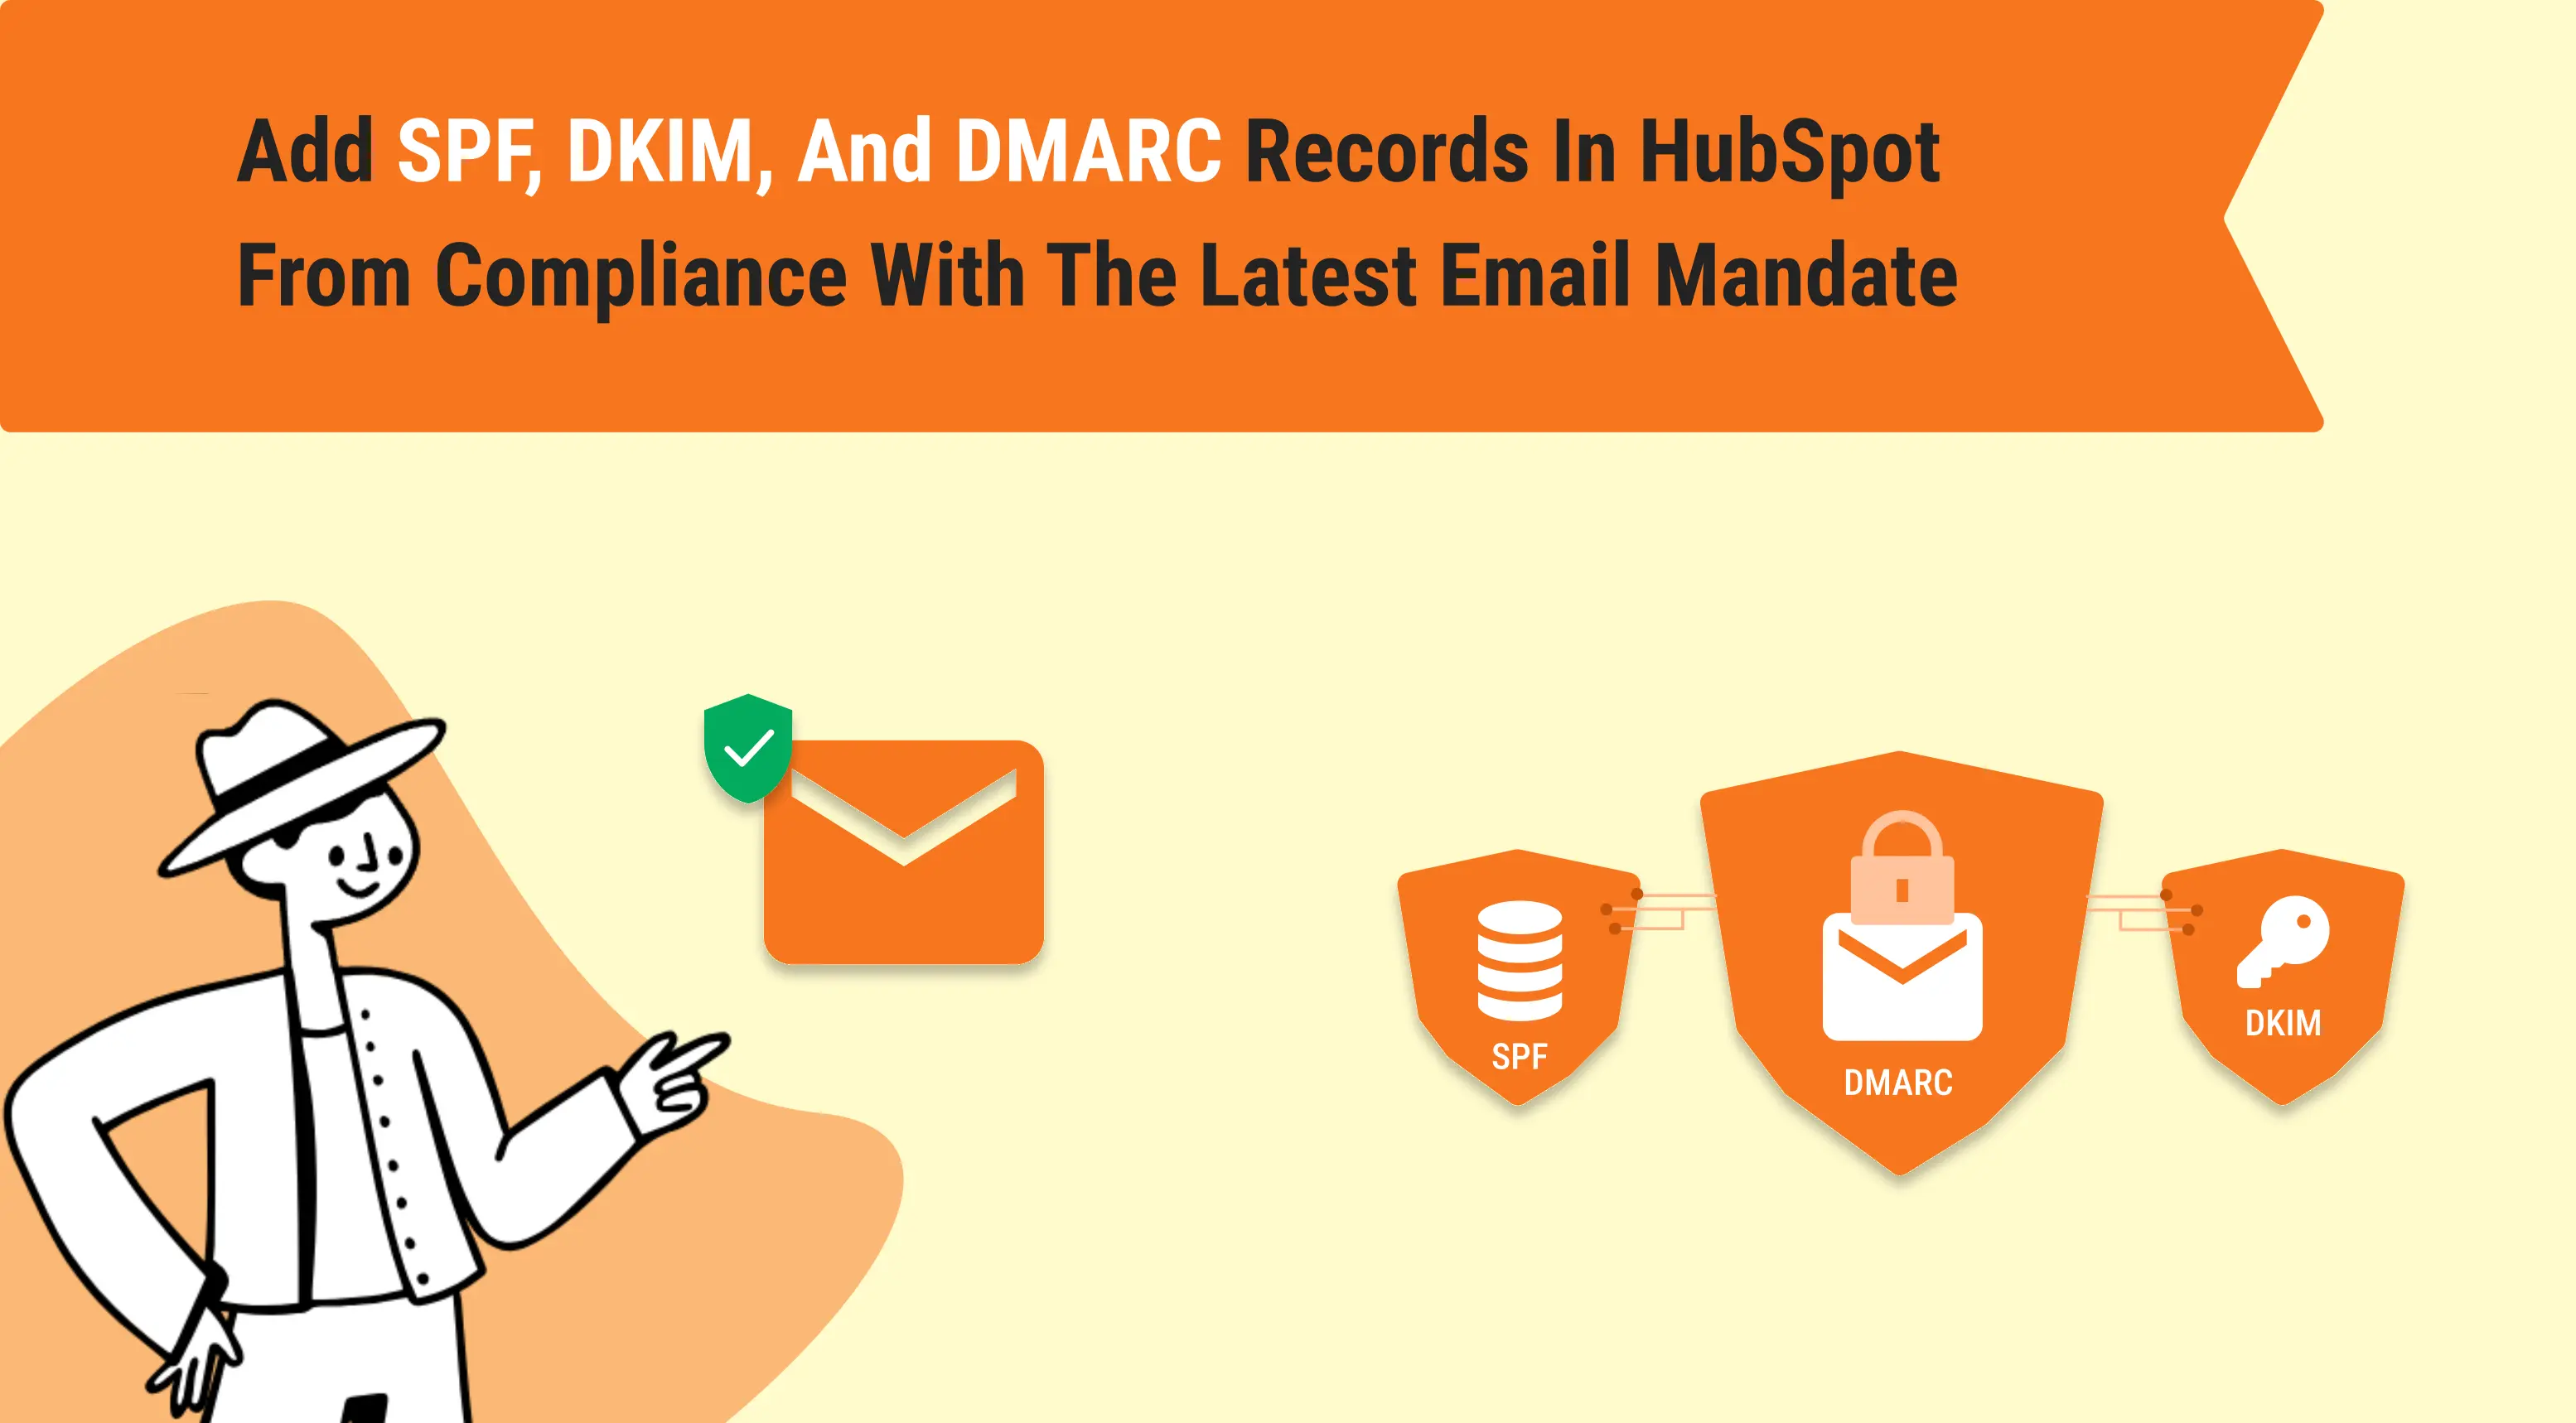 Add SPF, DKIM, and DMARC Records in HubSpot from Compliance with the Latest Email Mandate